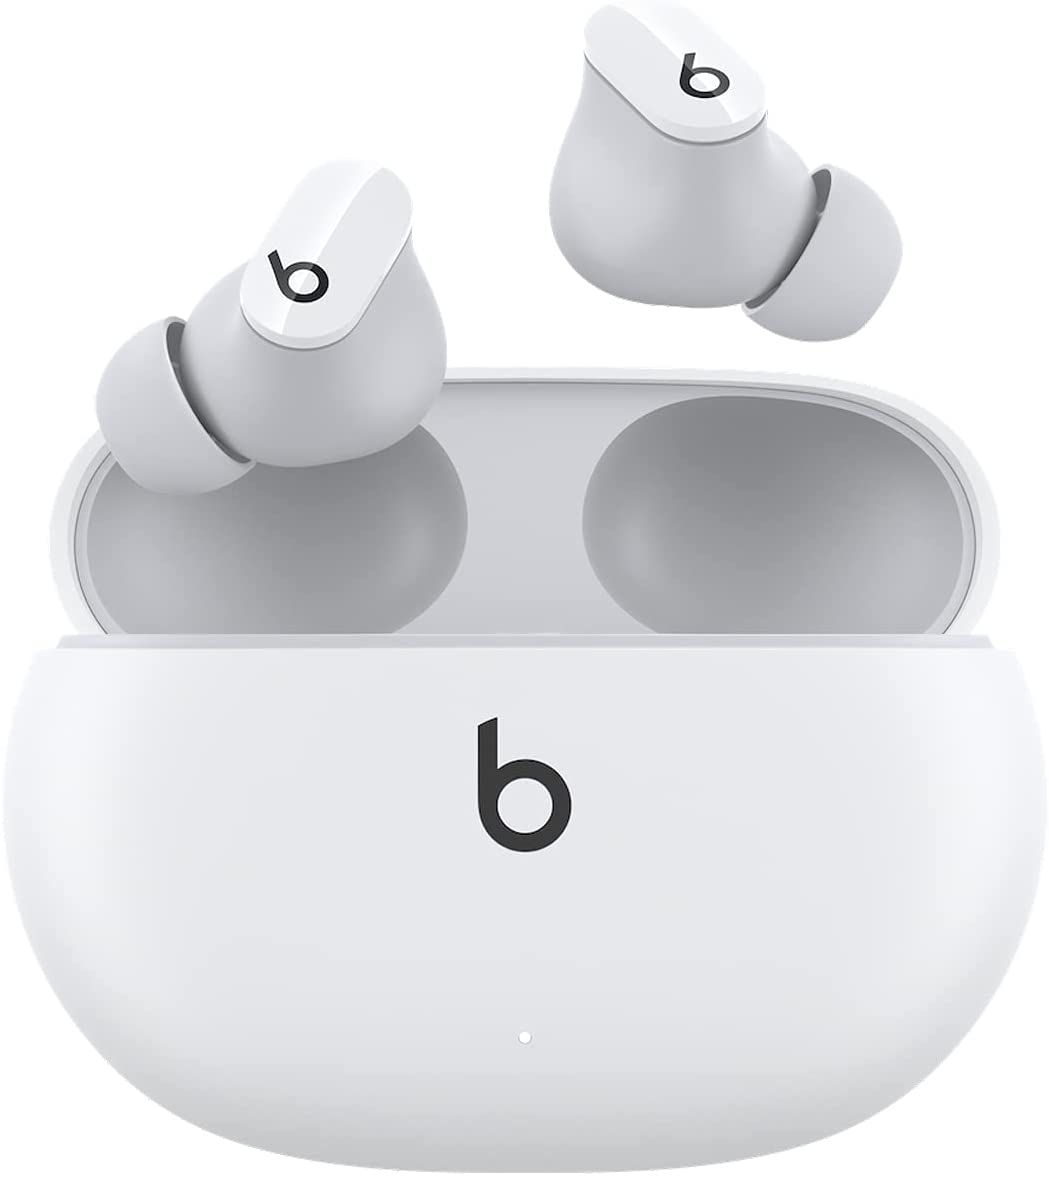 Beats Studio Buds Totally Wireless Noise Cancelling Earphones - White (Pre-Owned)